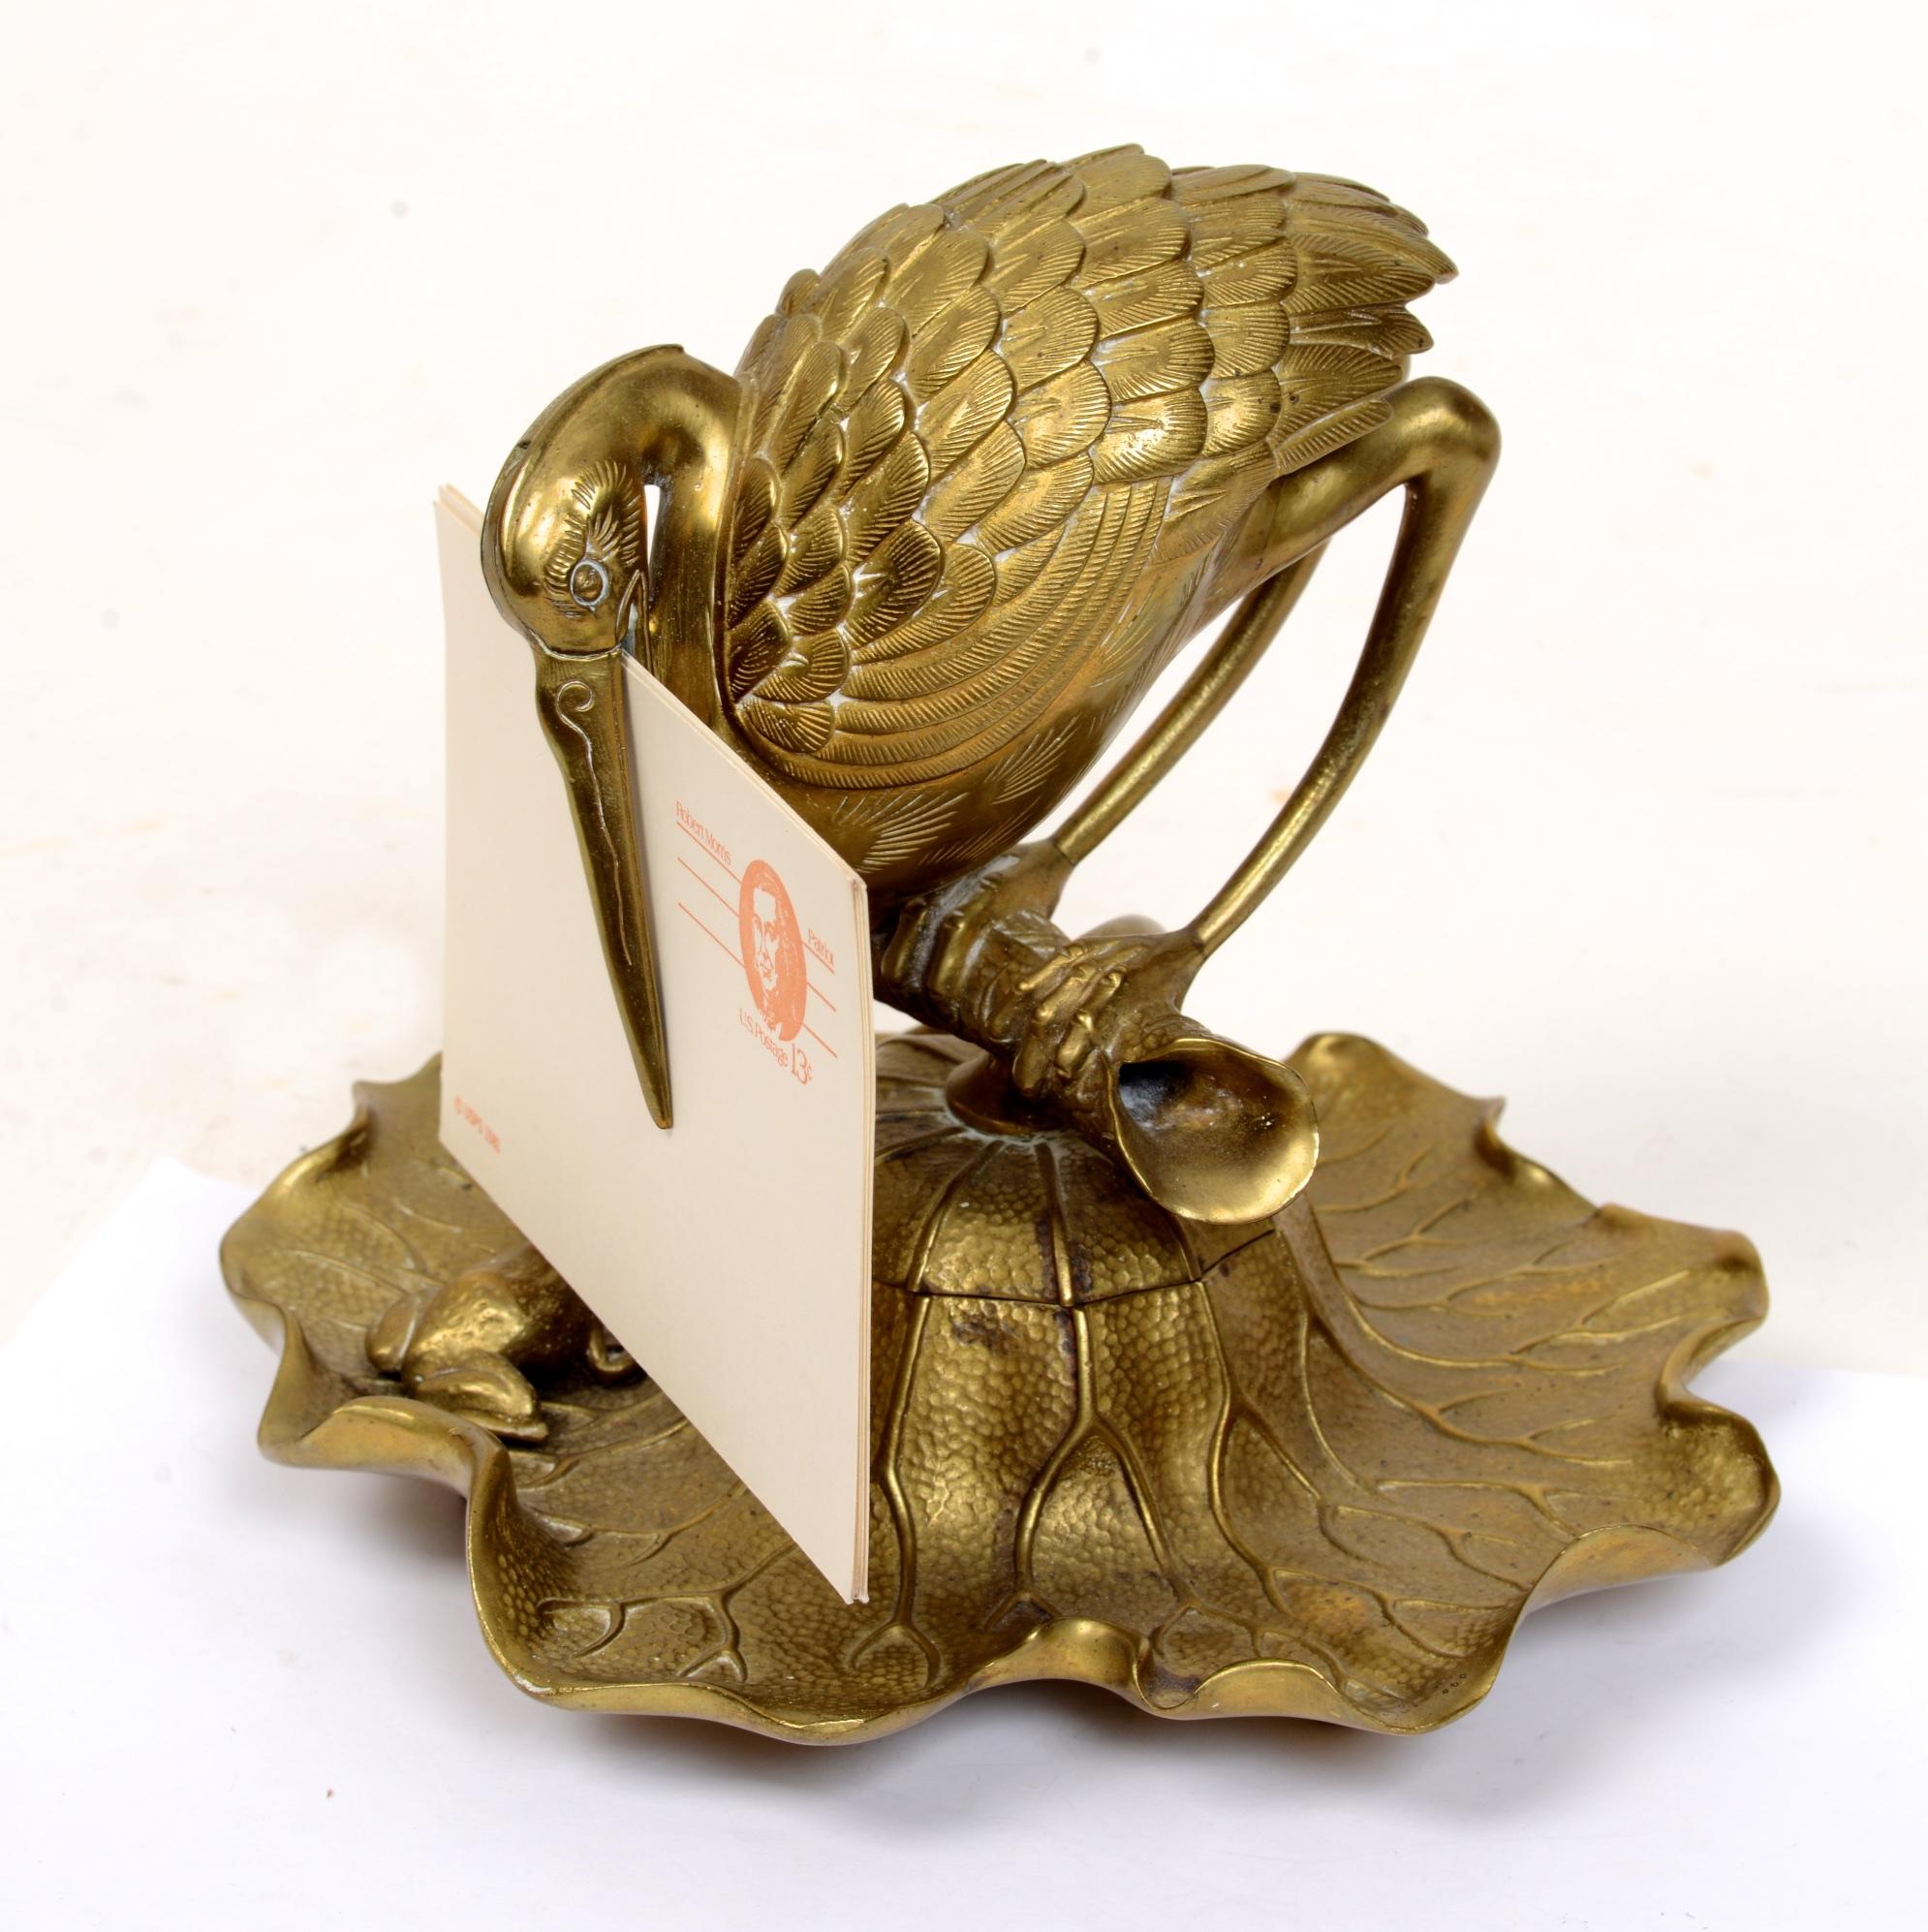 Bronze Heron & Frog Lily form inkwell, with an articulated hinged mouth letter holder. The heron perched on an open branch swivels to reveal an ink pot. The lily pad base pen holder with a seated frog, no visible markings. This form was seen in the